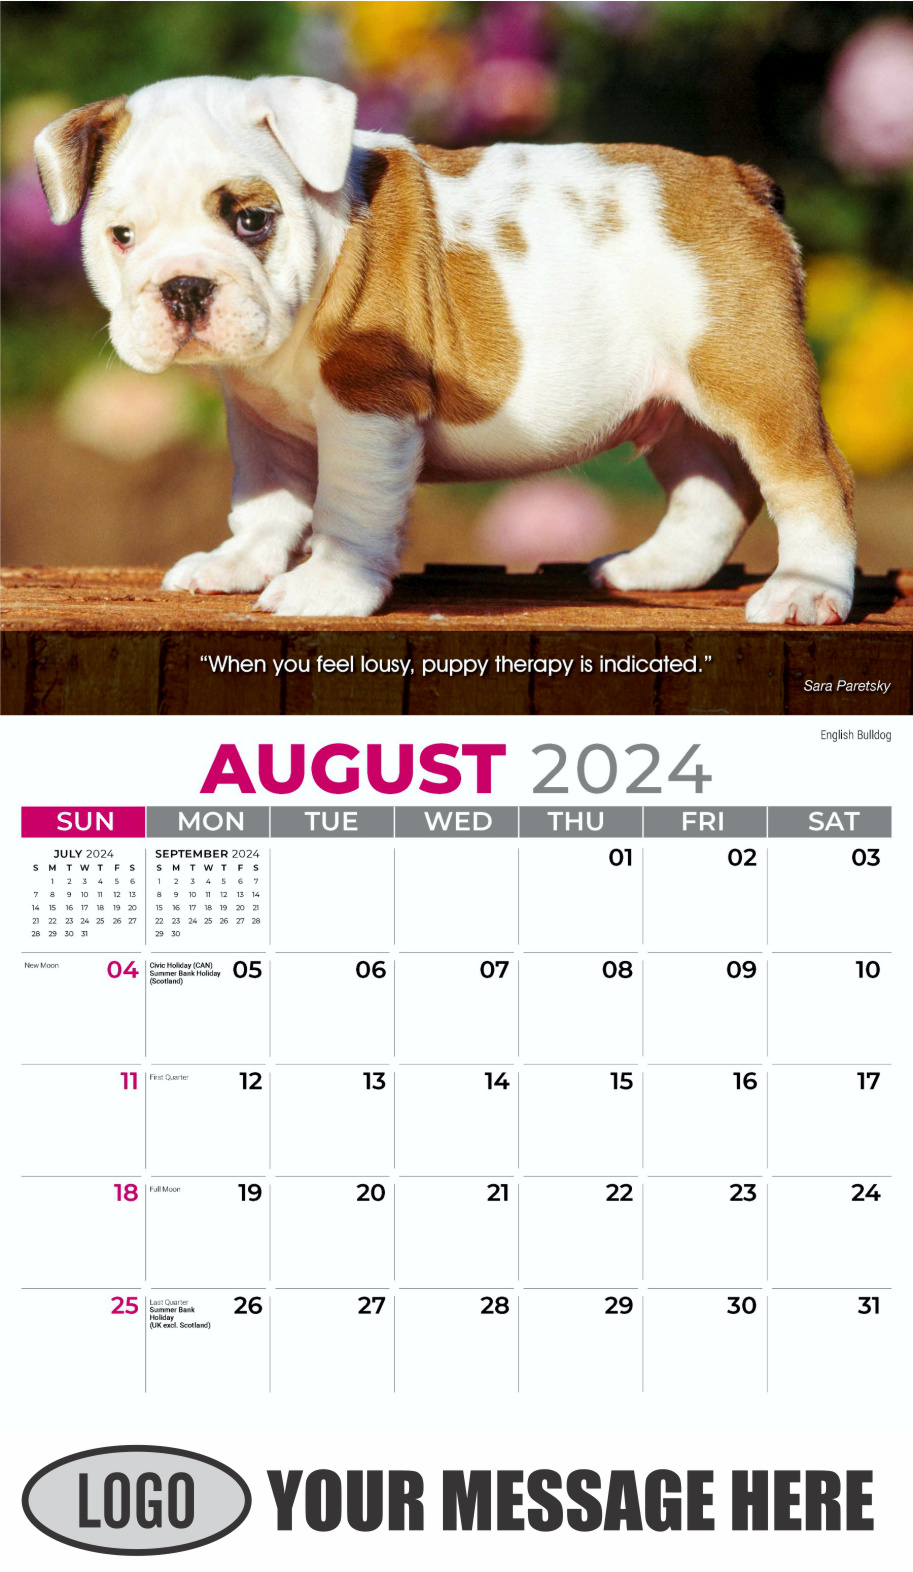 Dogs 2024 Vets and Pets Business Promotion Calendar - August